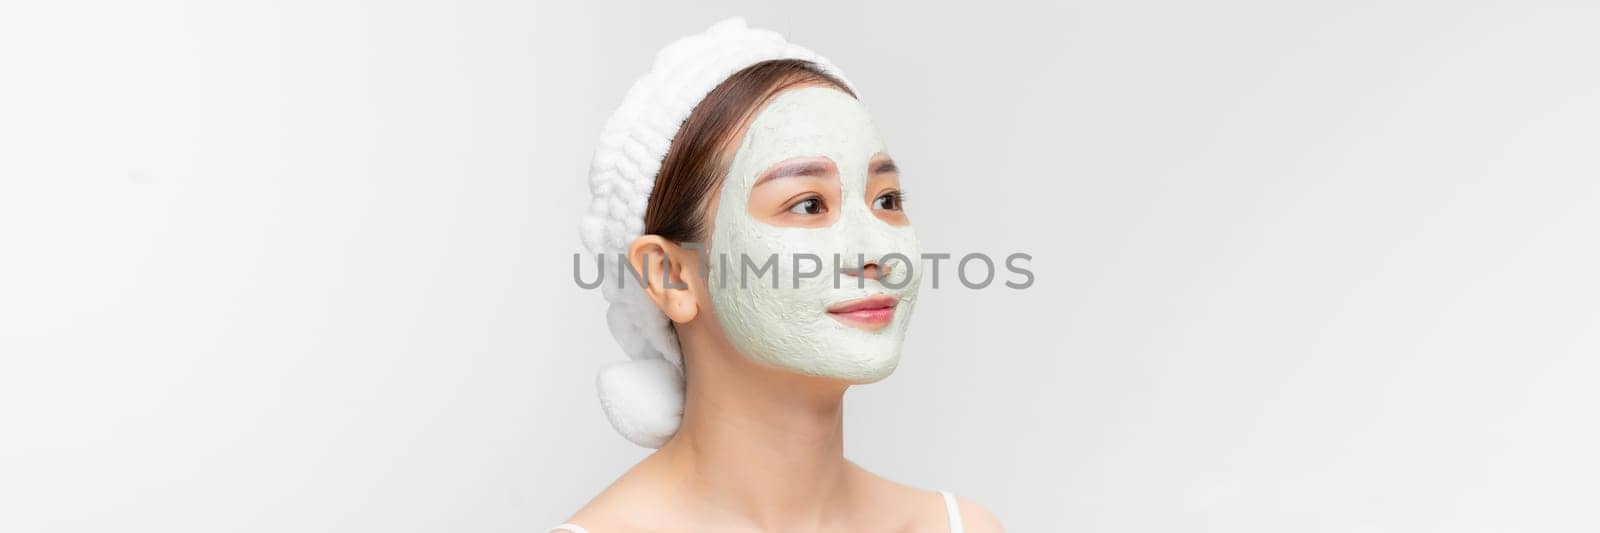 woman smiling facial skin care portrait on white banner background